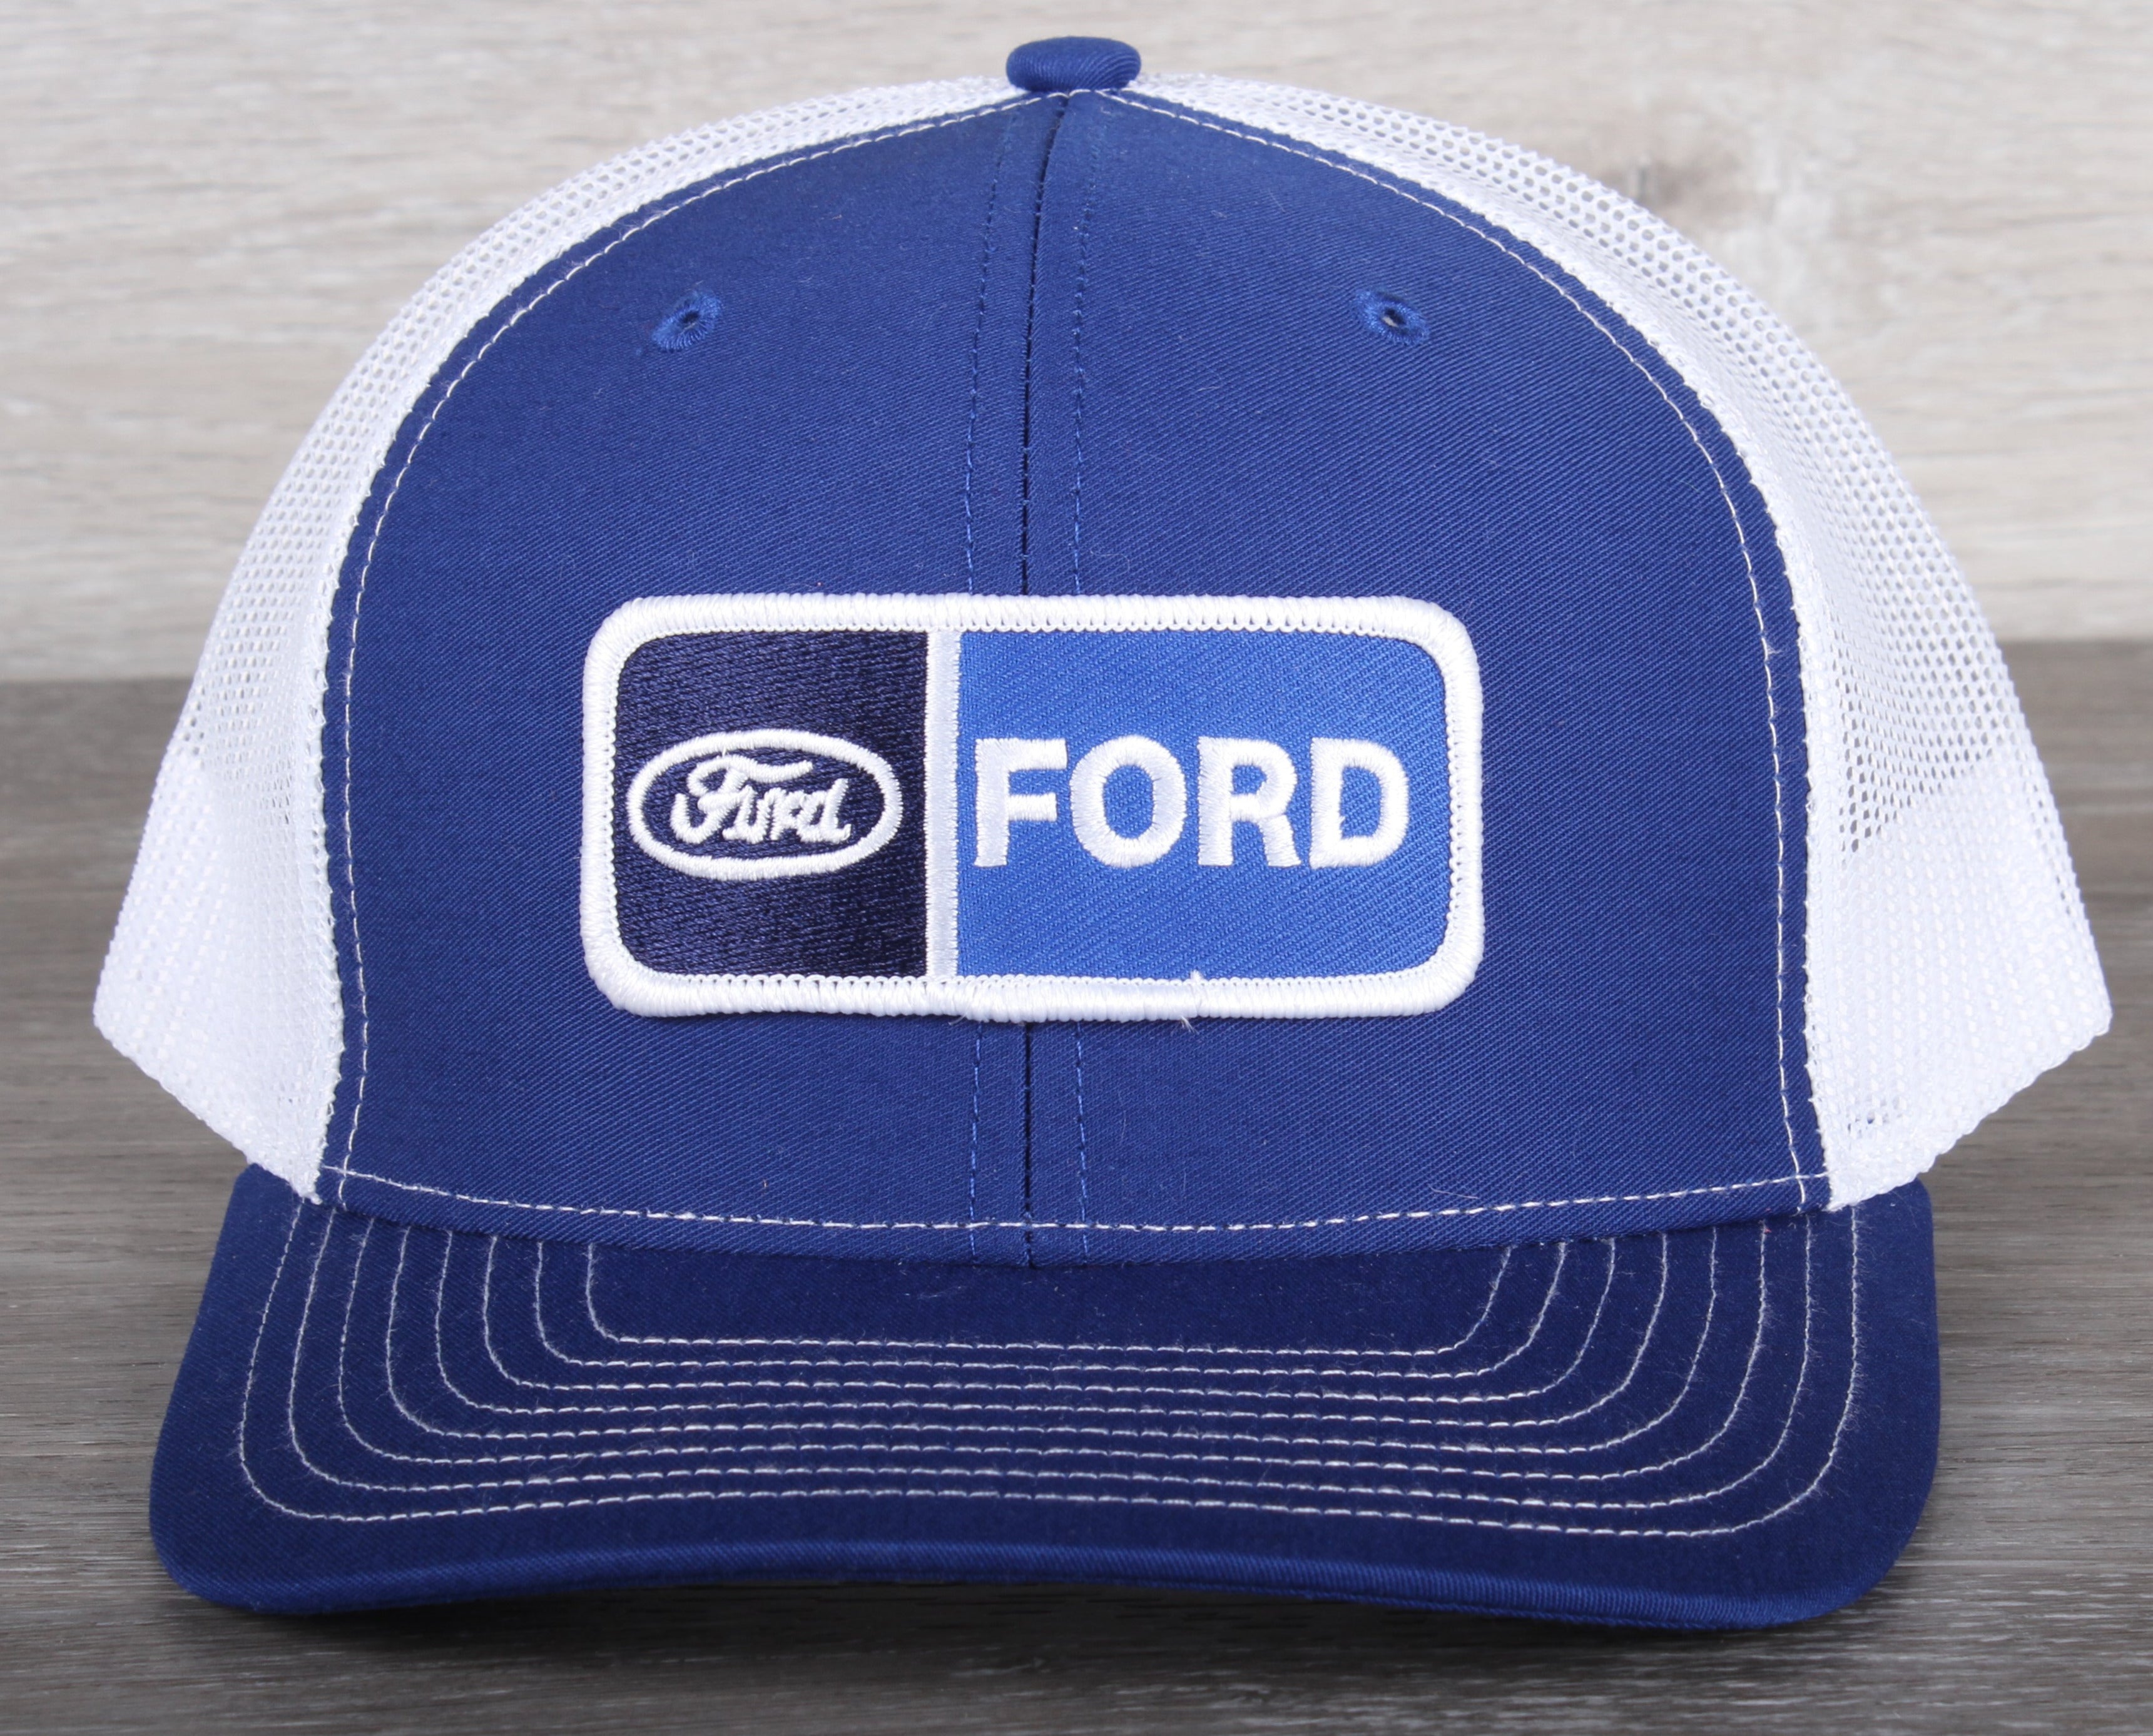 Vintage Ford patch on a Richardson 112 trucker hat